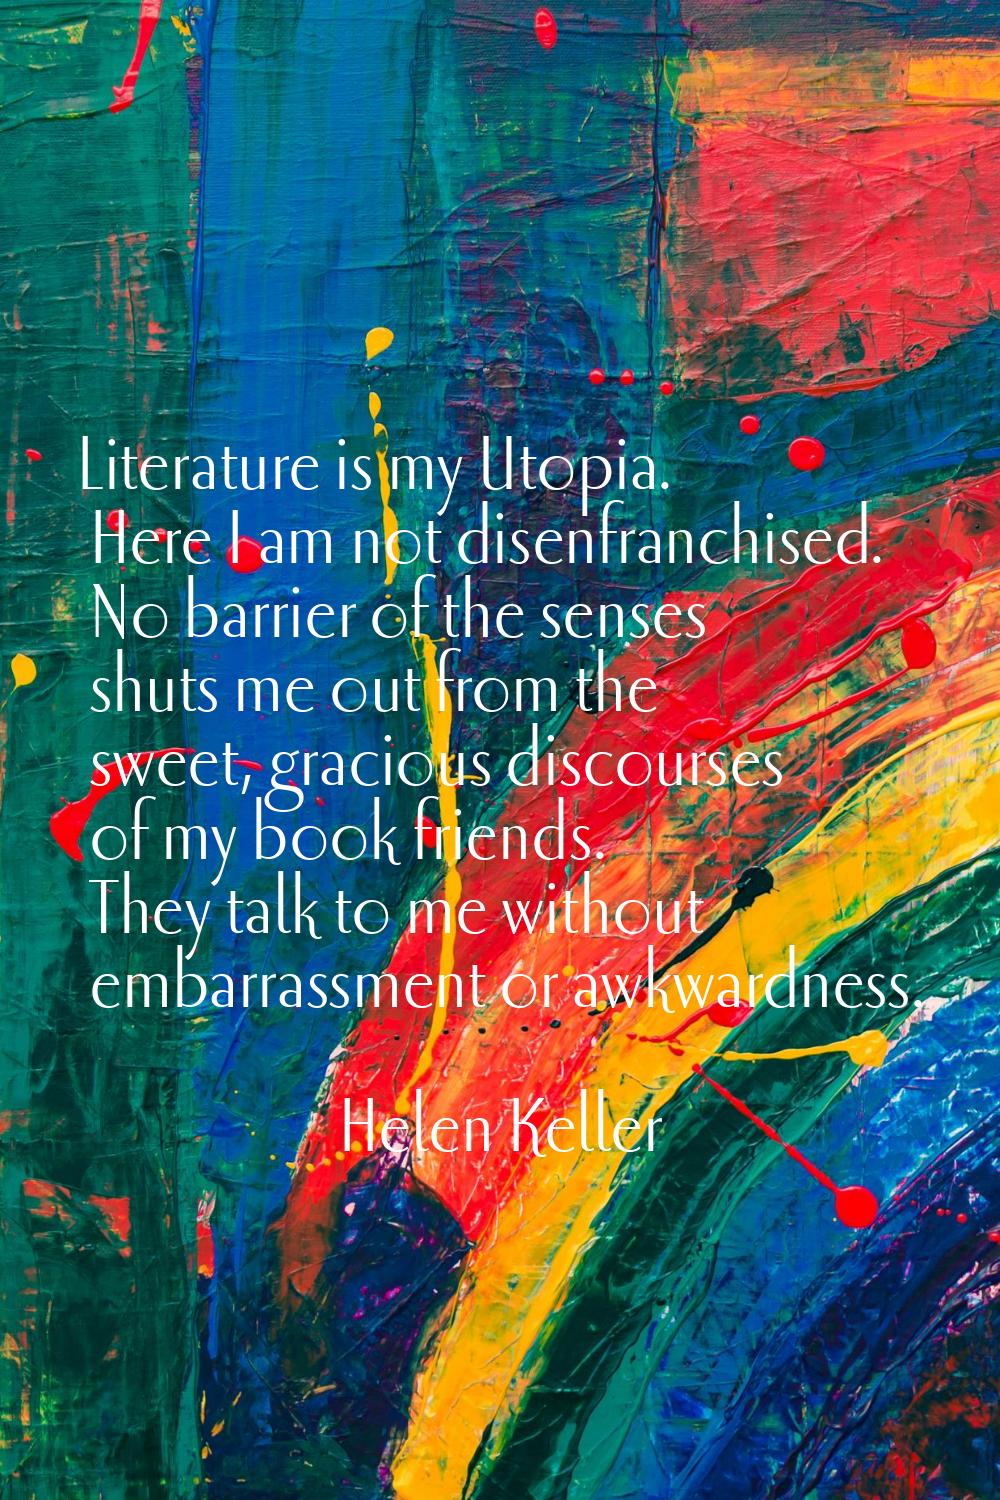 Literature is my Utopia. Here I am not disenfranchised. No barrier of the senses shuts me out from 